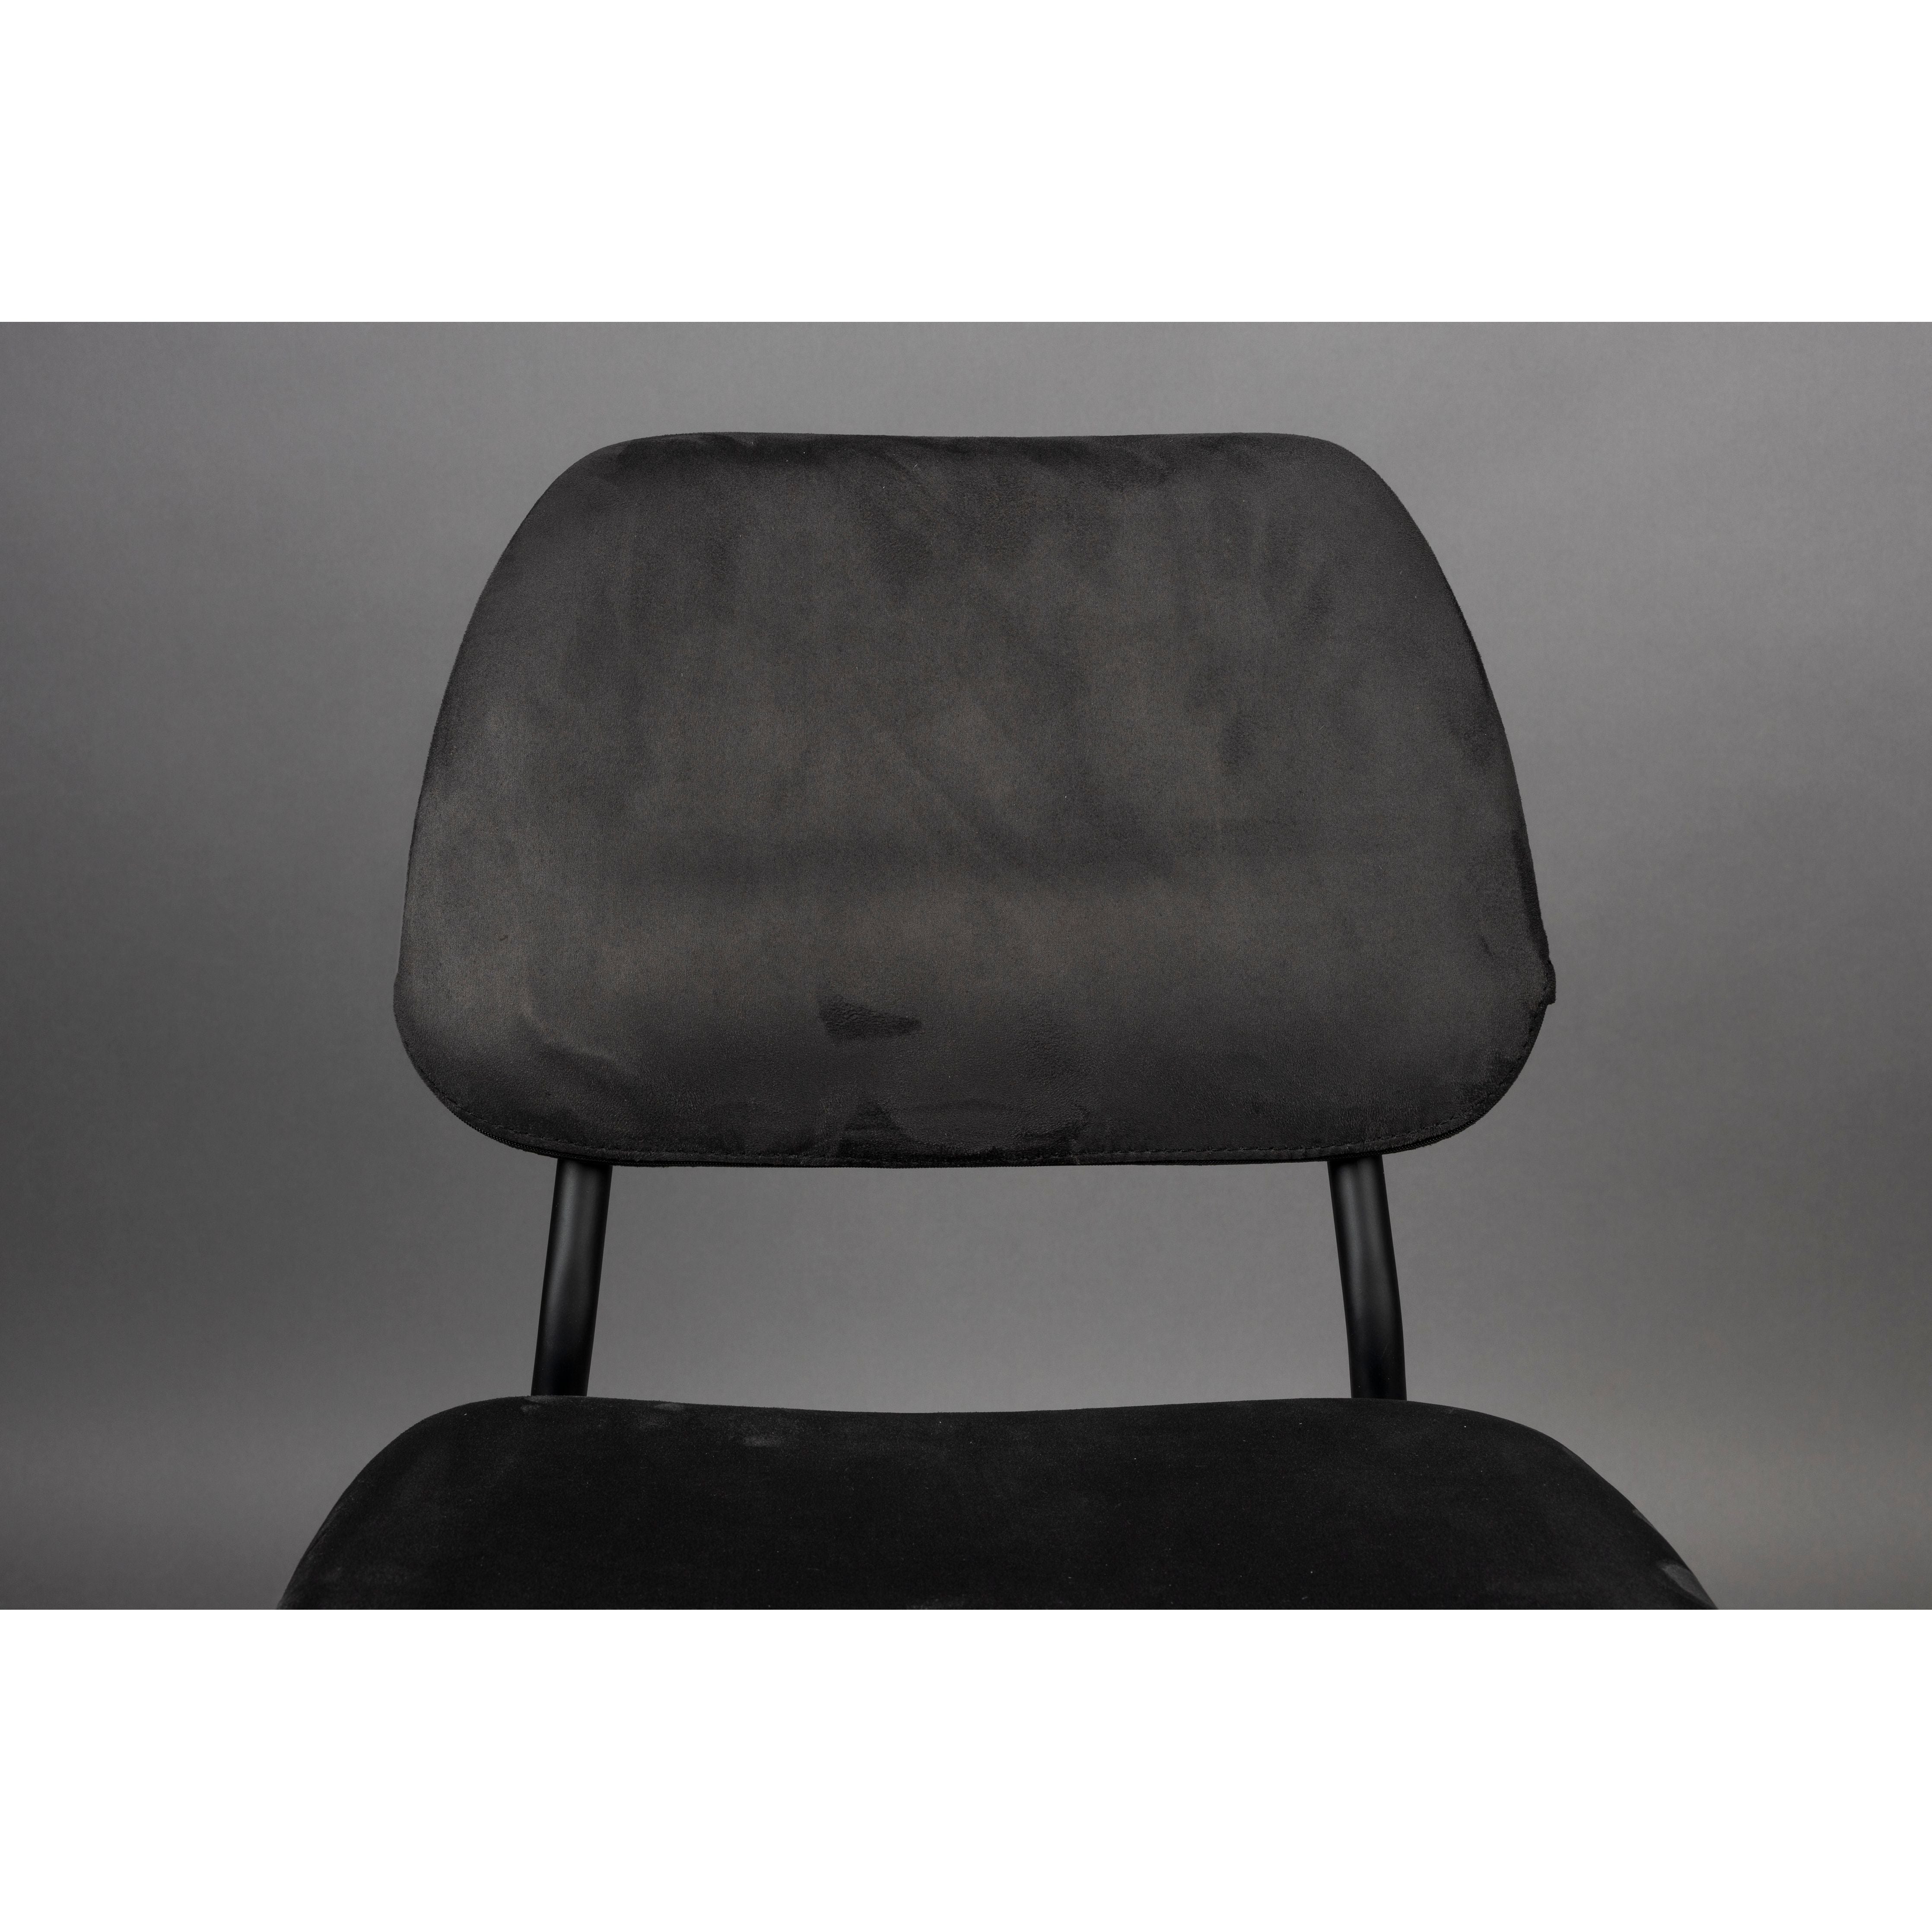 Chair darby black | 2 pieces